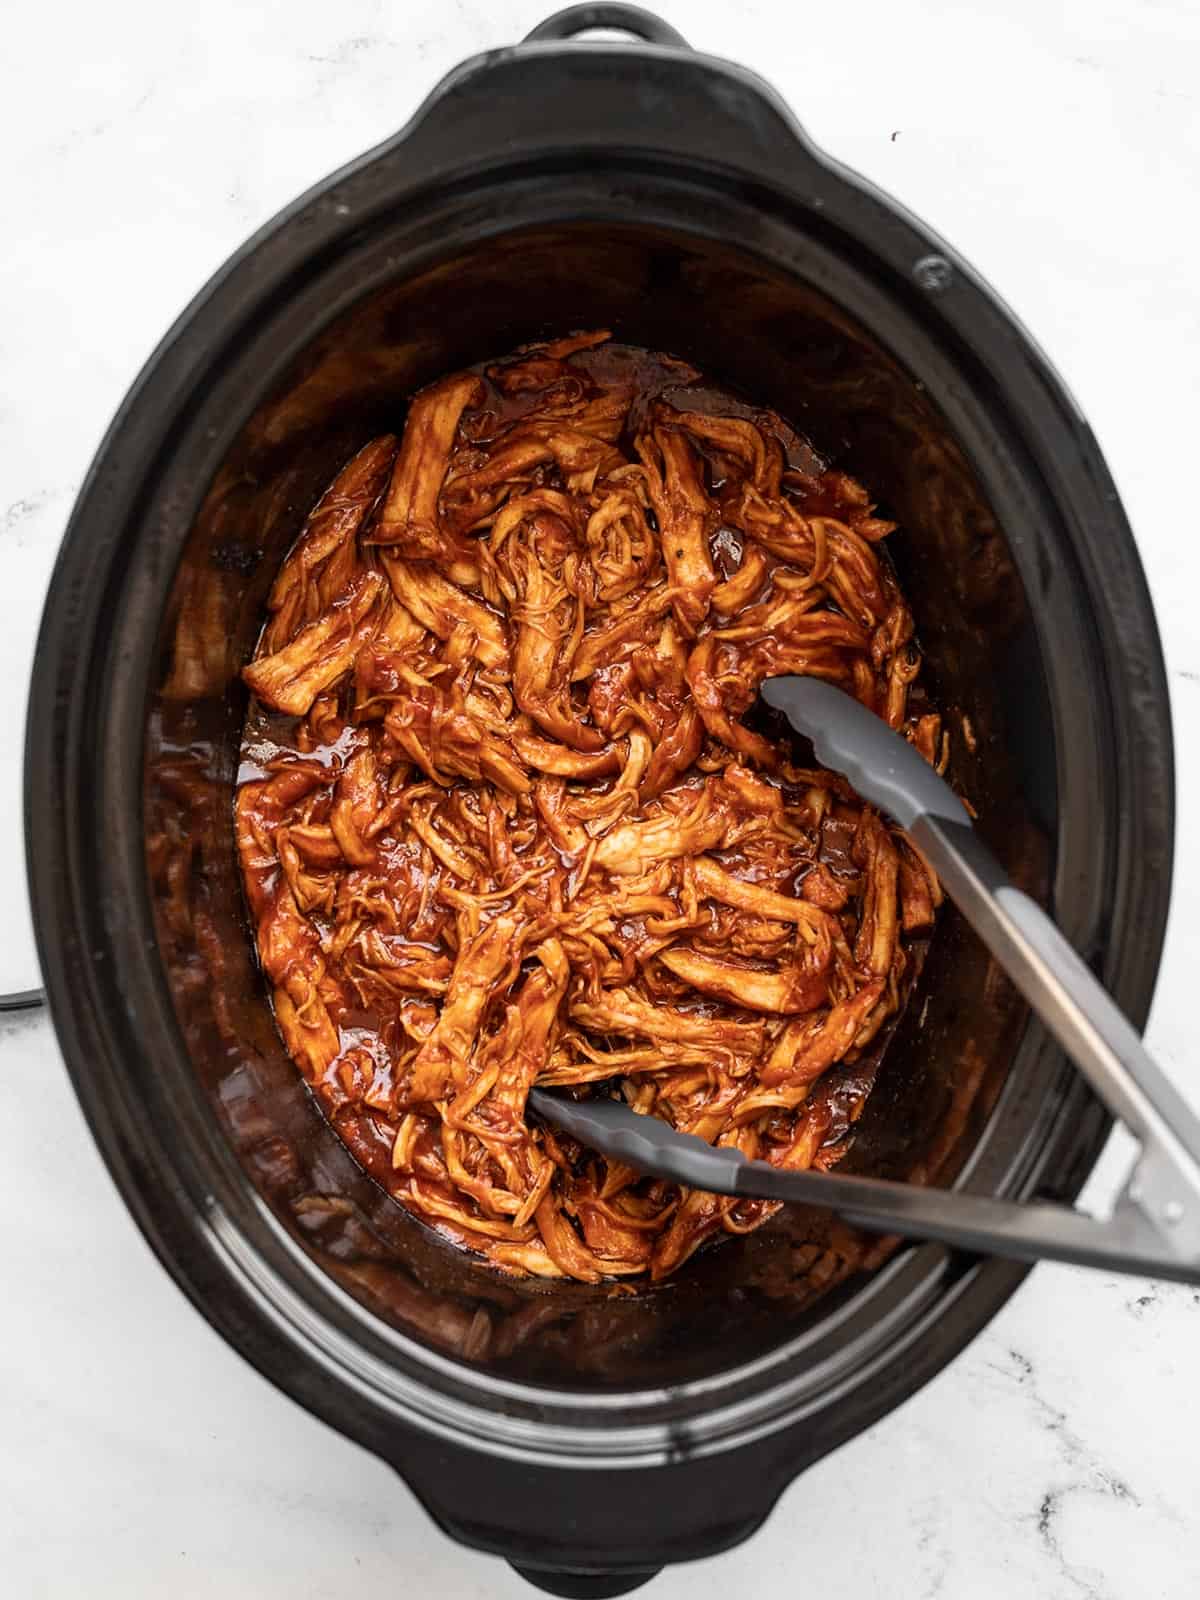 Overhead view of shredded BBQ chicken in a slow cooker with flip flops.